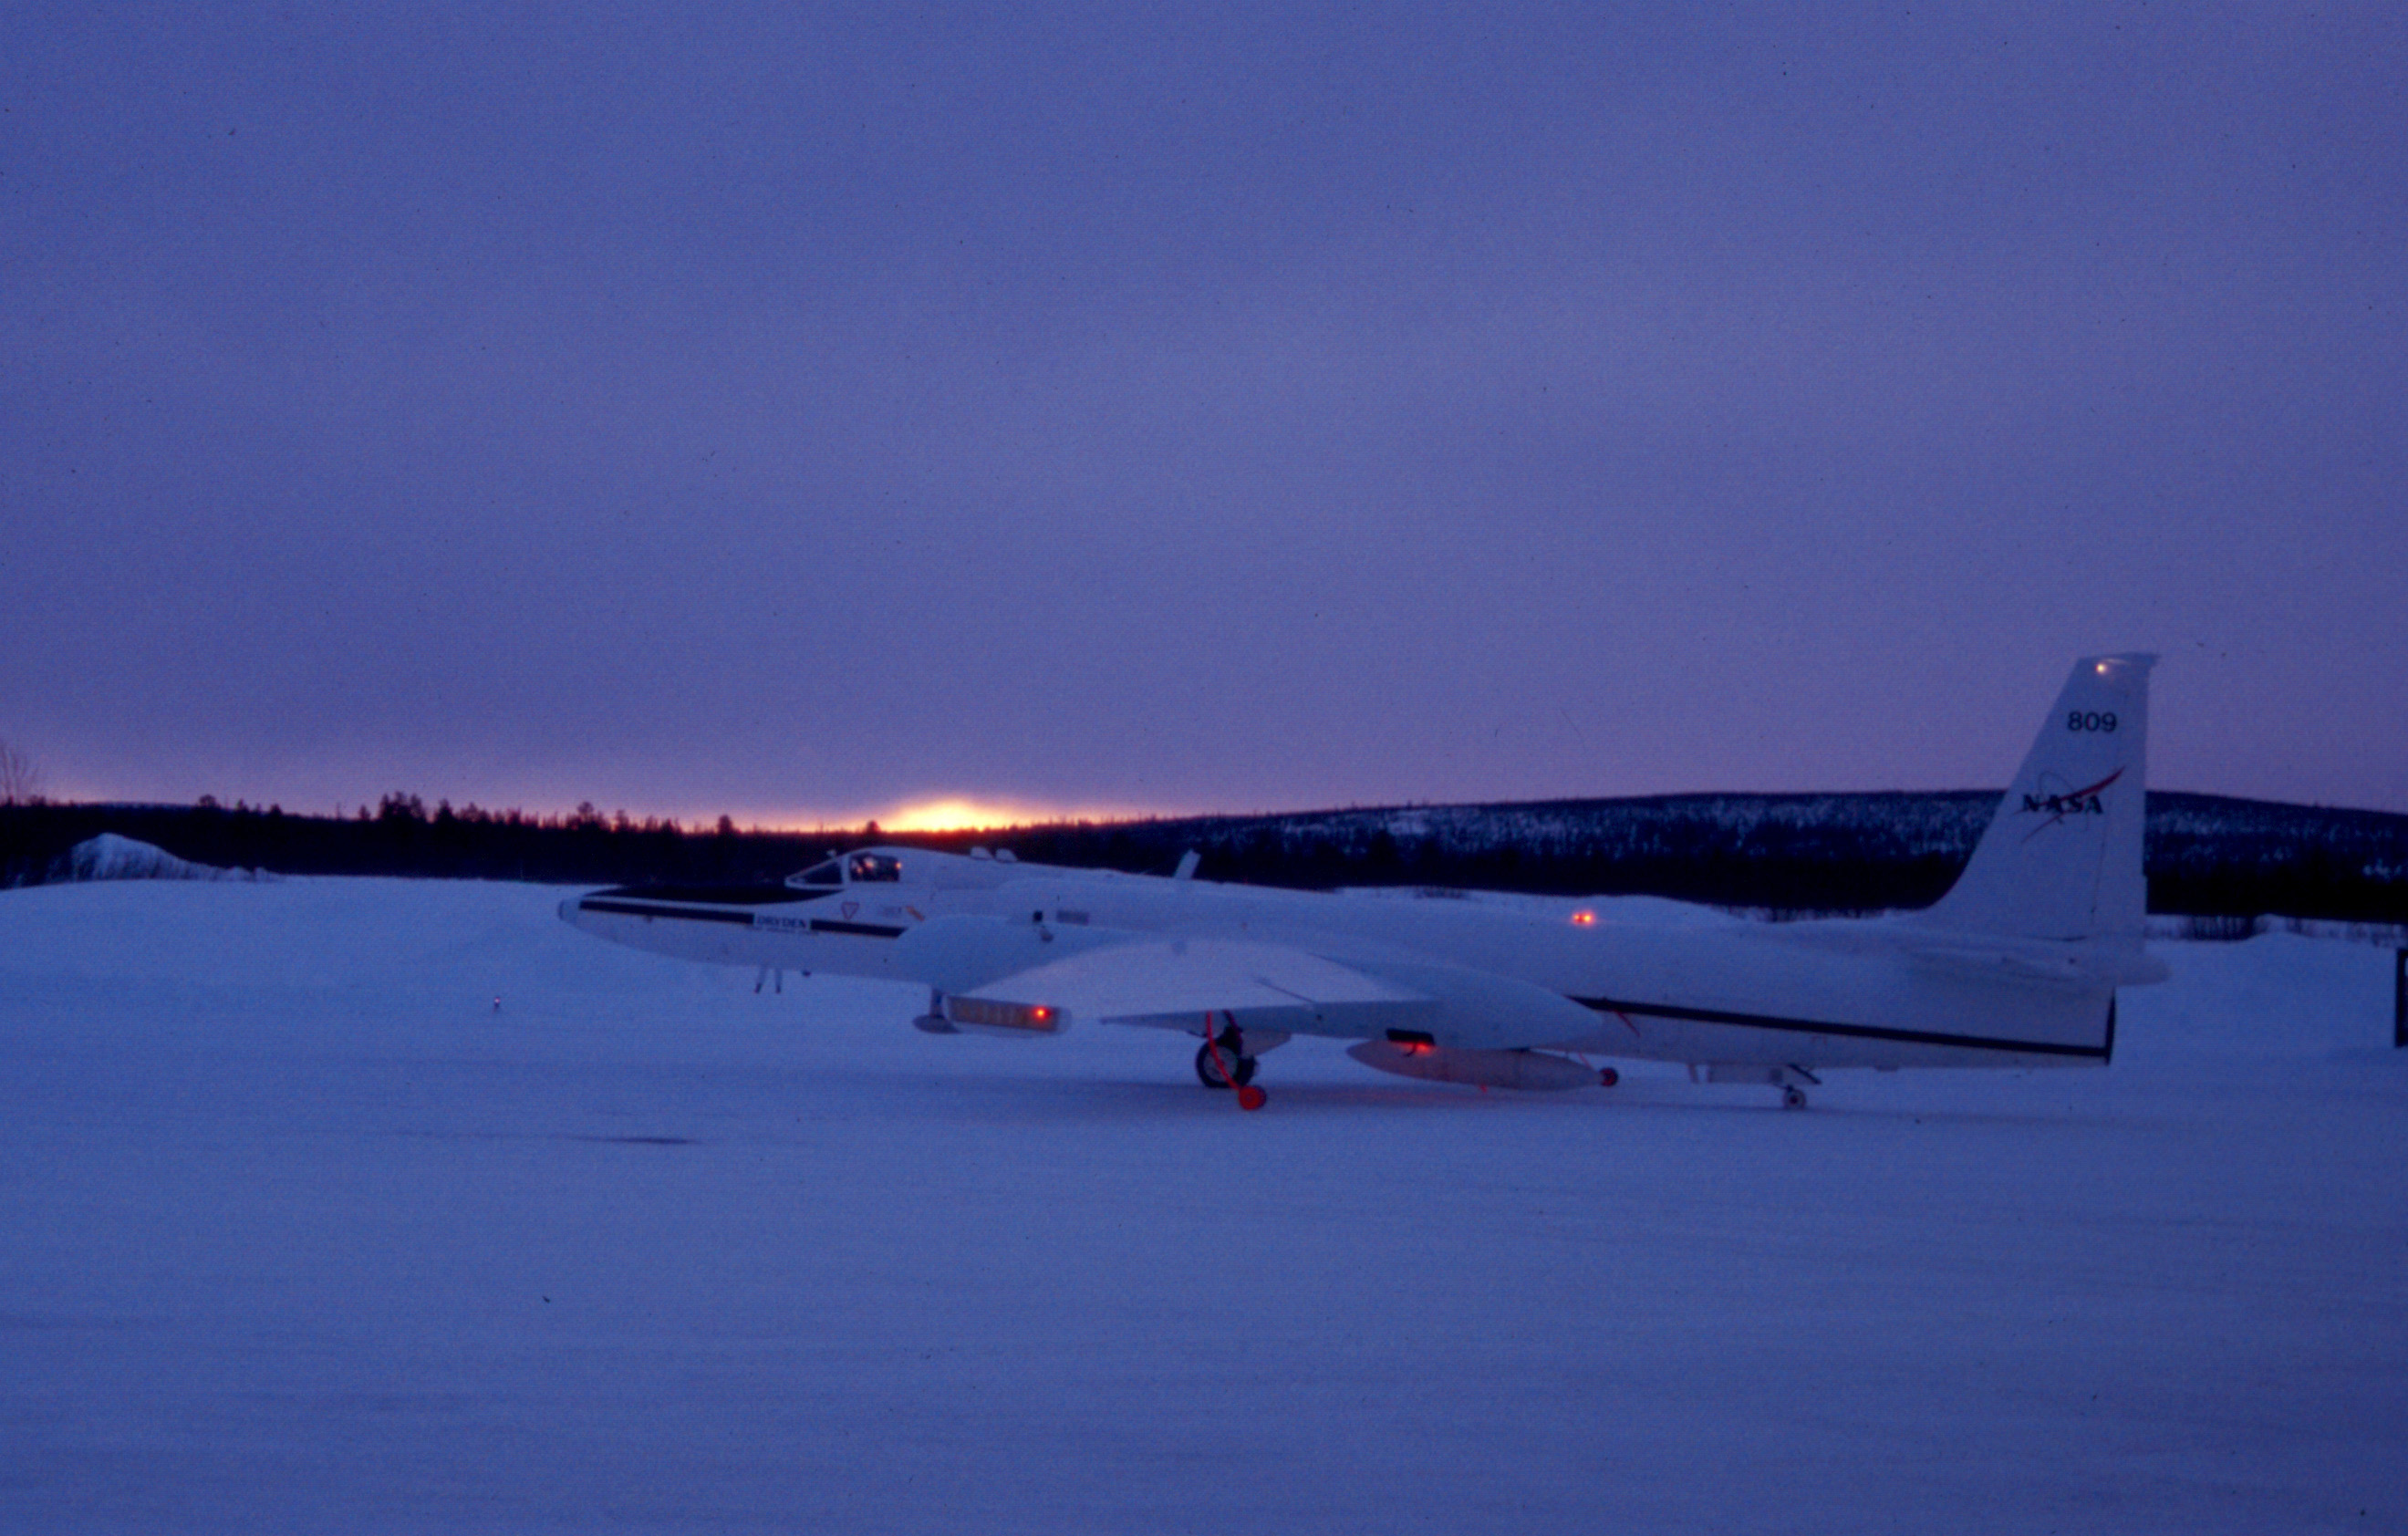 The NASA ER-2 aircraft, prior to takeoff for a SOLVE/THESEO-2000 research flight, at the Arena Arctica research facility in Kiruna, Sweden.